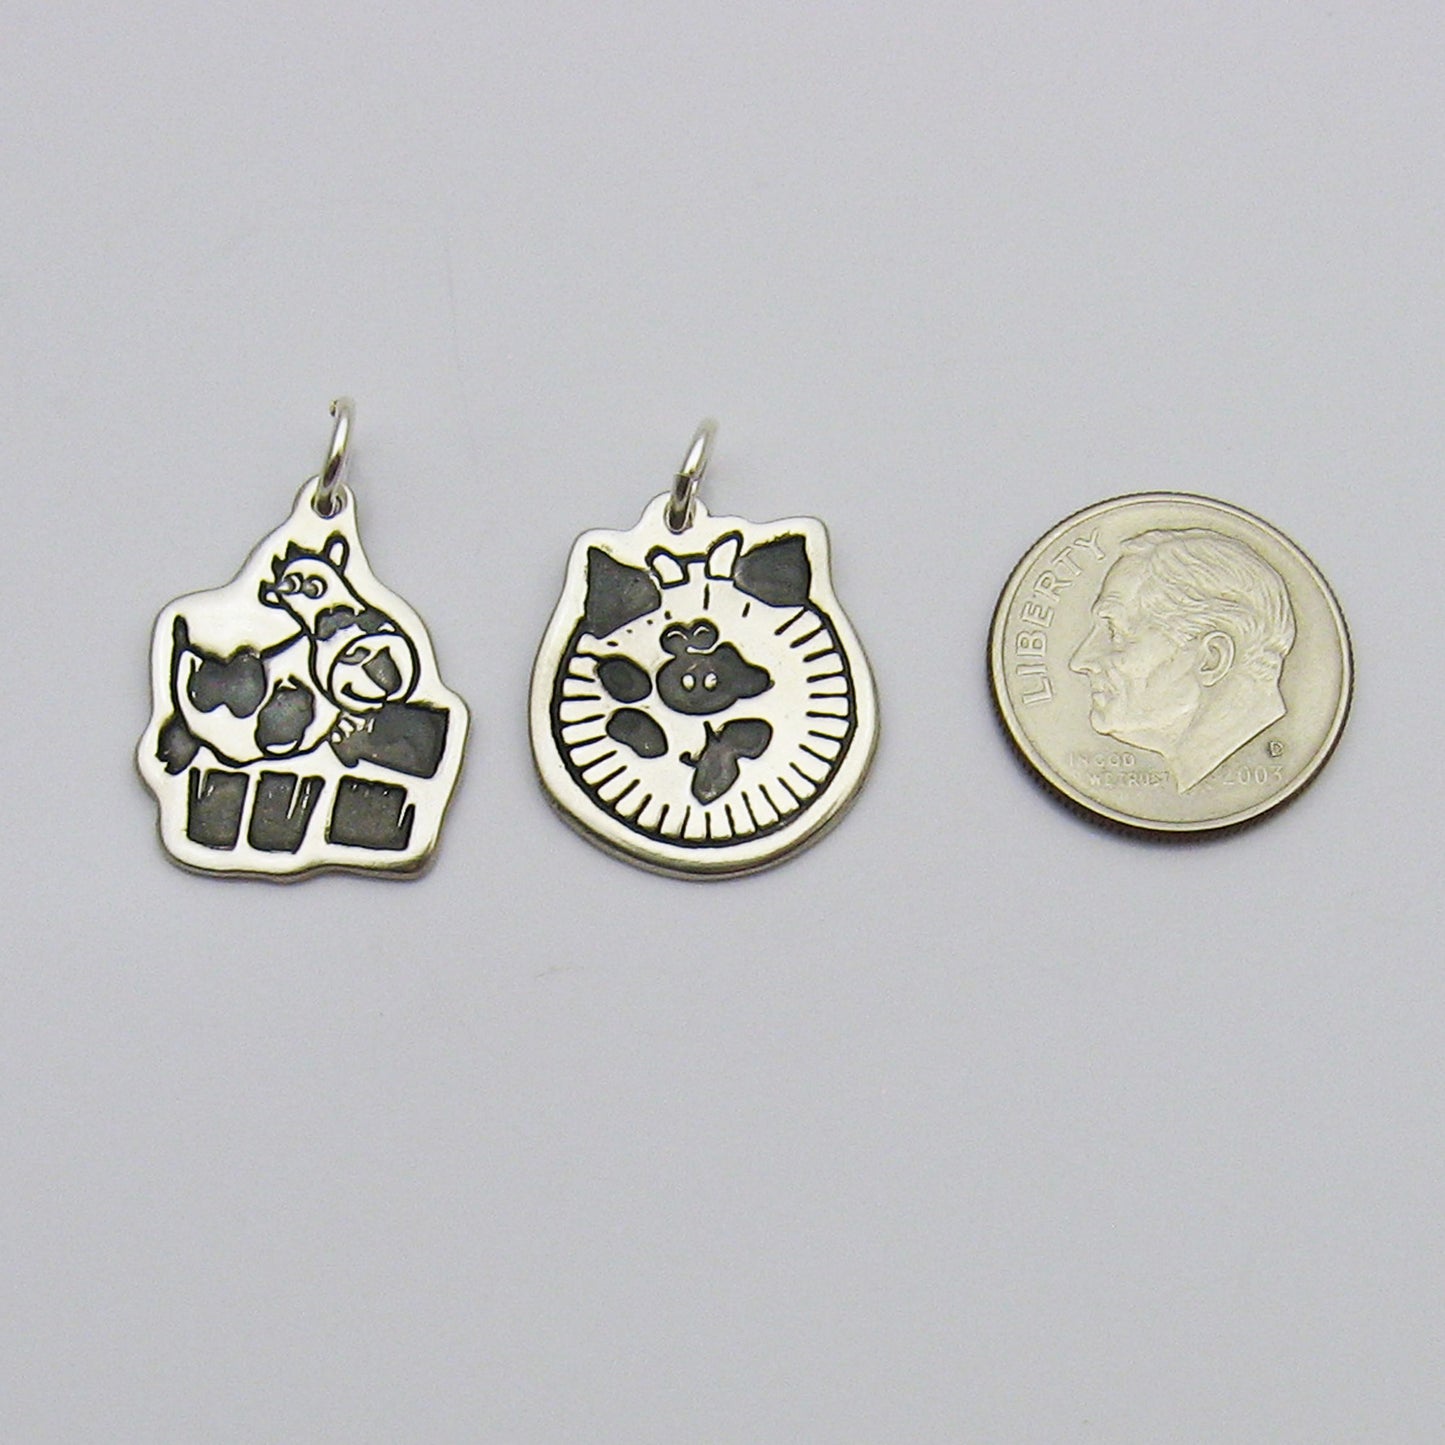 Children's Artwork / Drawing Pendant Size Reference Next To a Dime